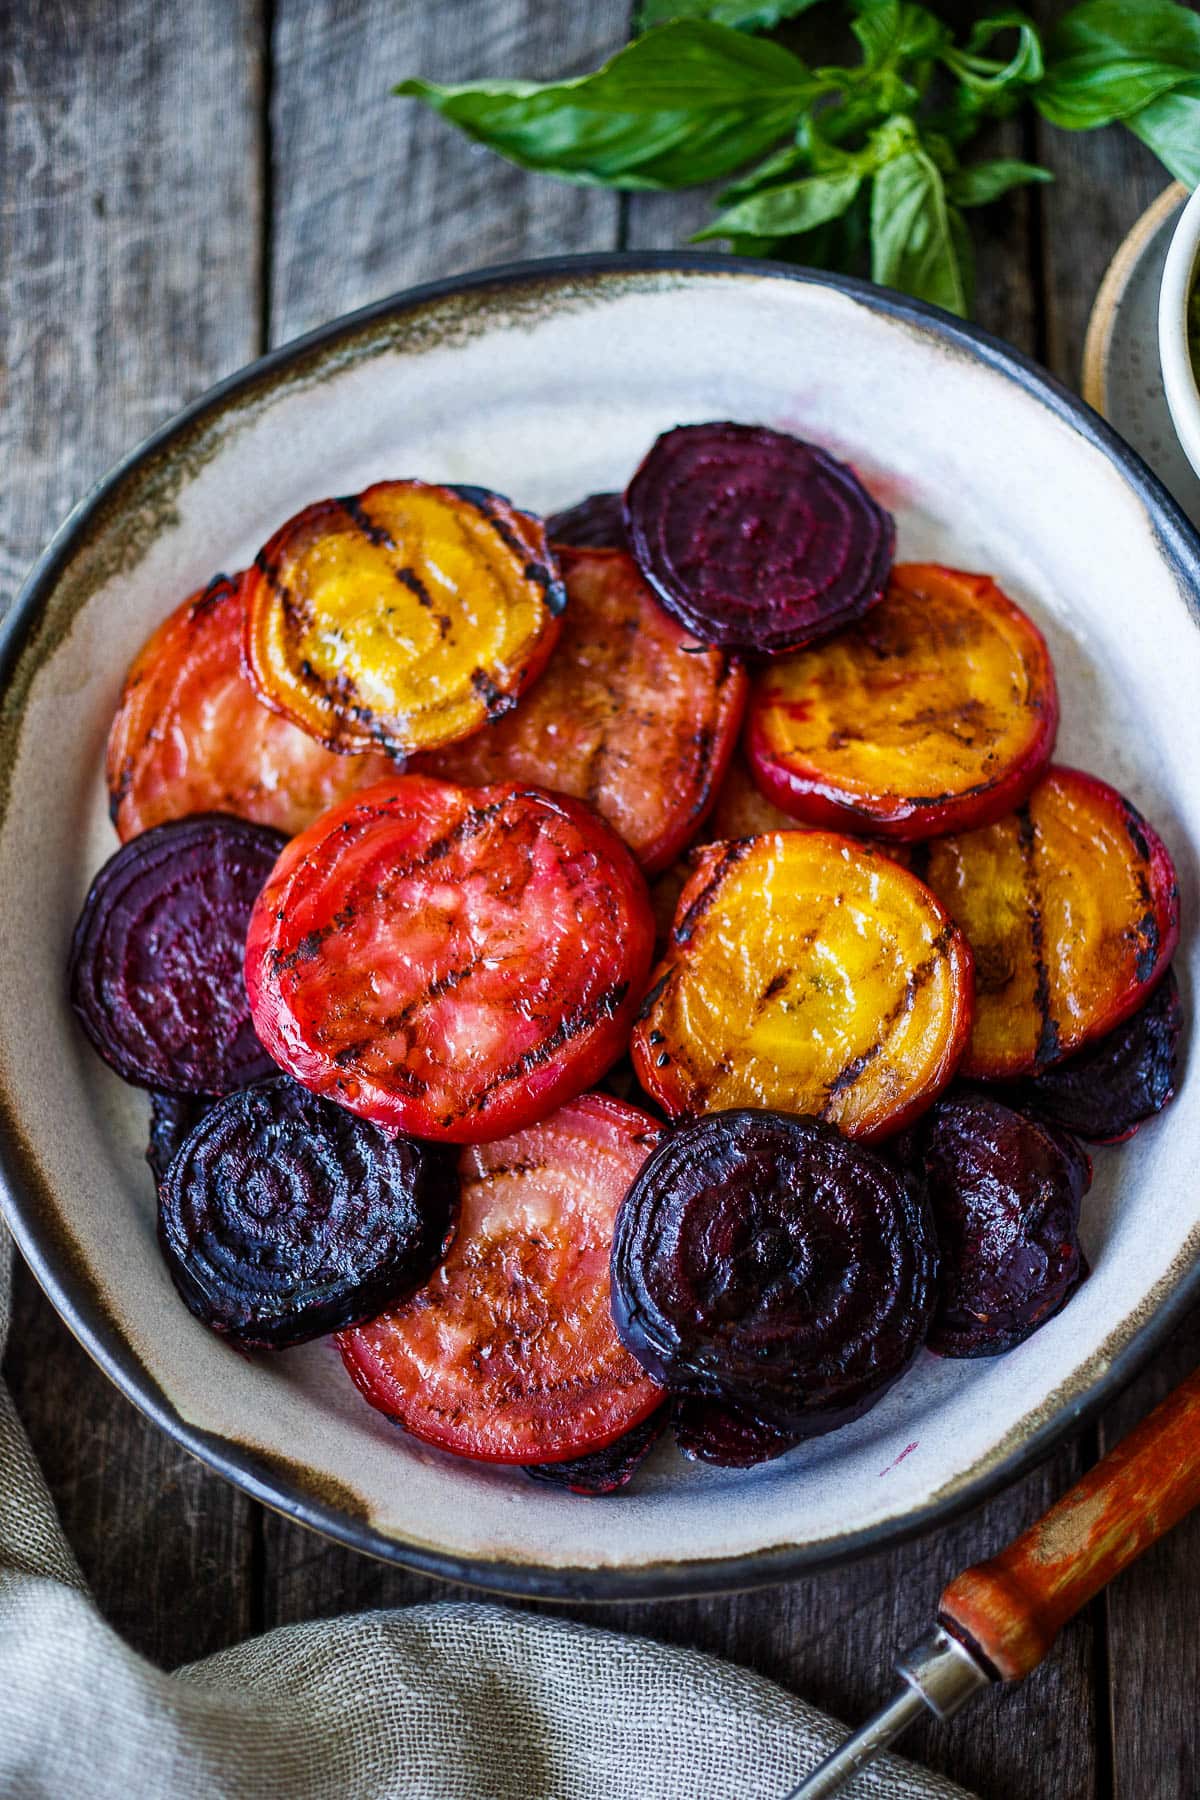 These Grilled Beets are perfectly tender with a rich caramelized flavor.  Top with pesto for over-the-top deliciousness.  Perfect as a side dish, or add to salads, toasts and bowls.